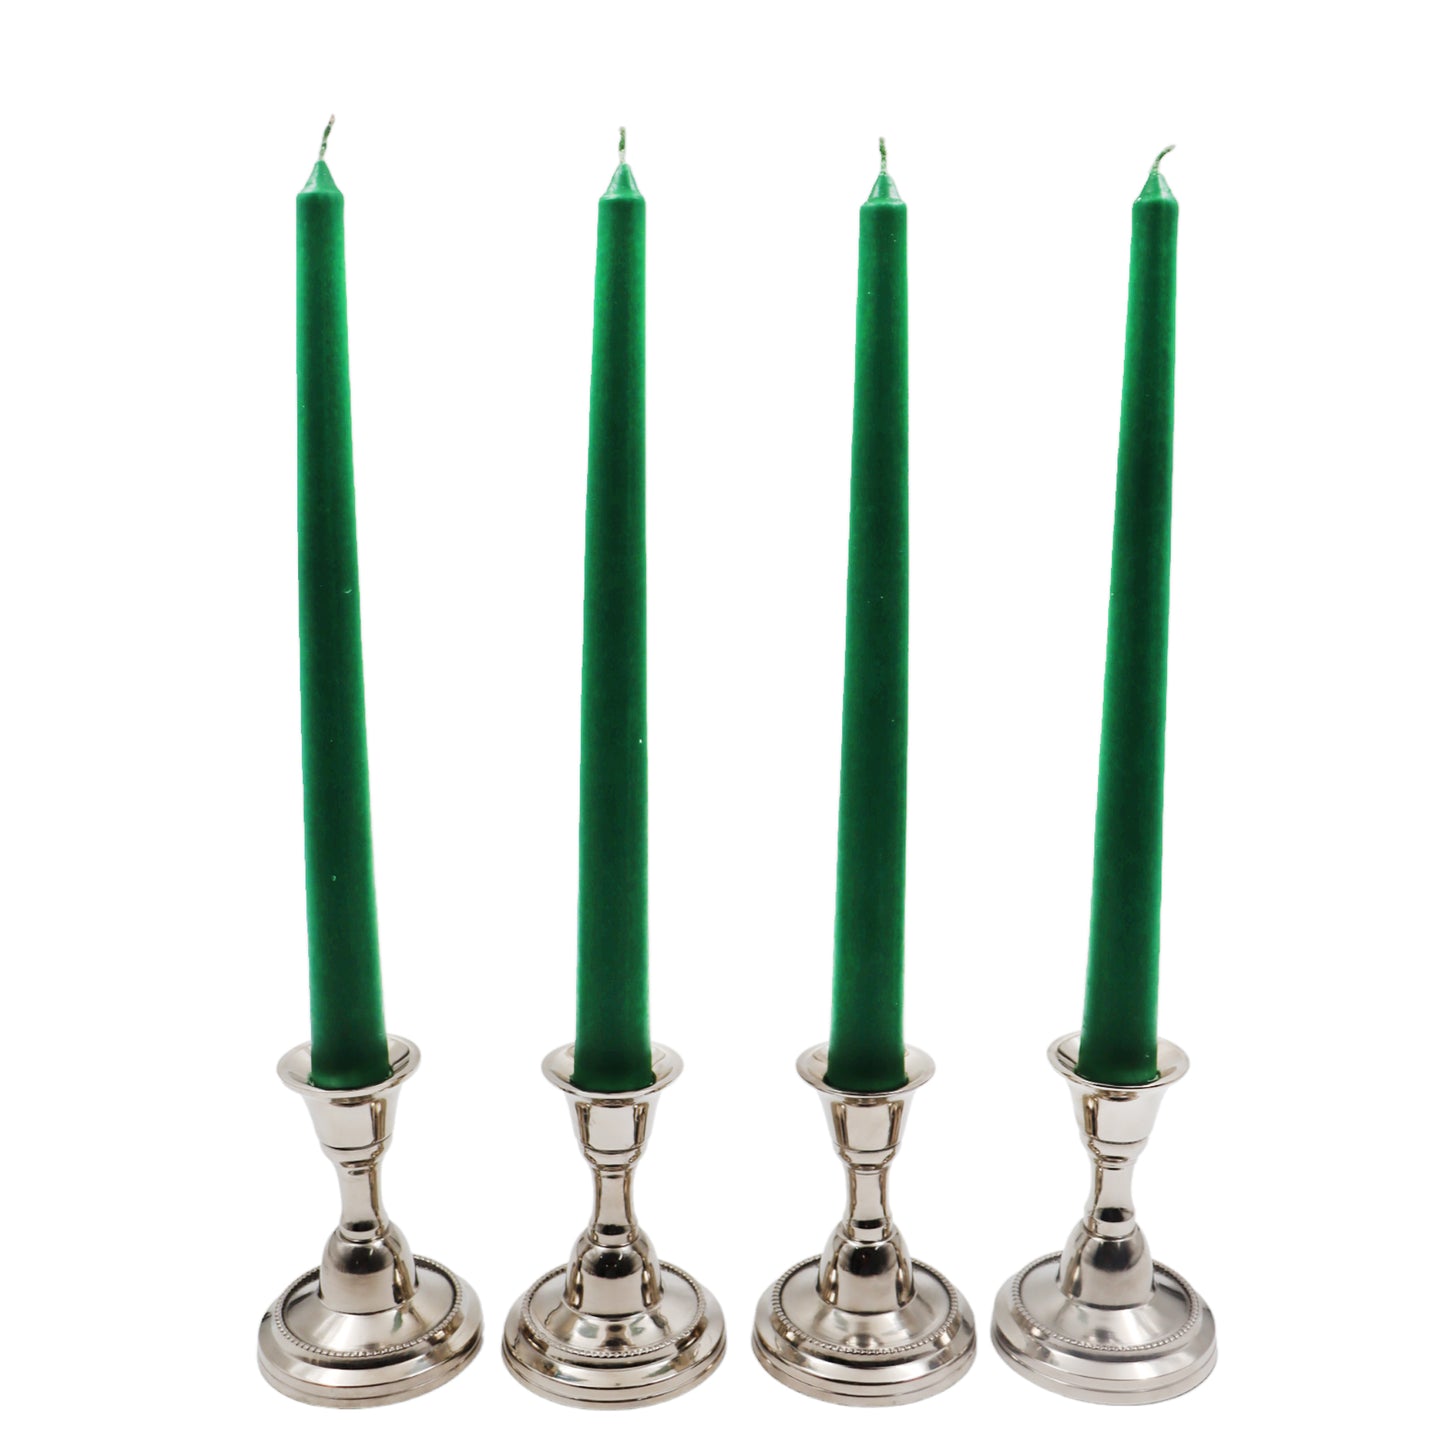 Hosley 4-Piece Unscented Green Taper Candles Set - 25CM